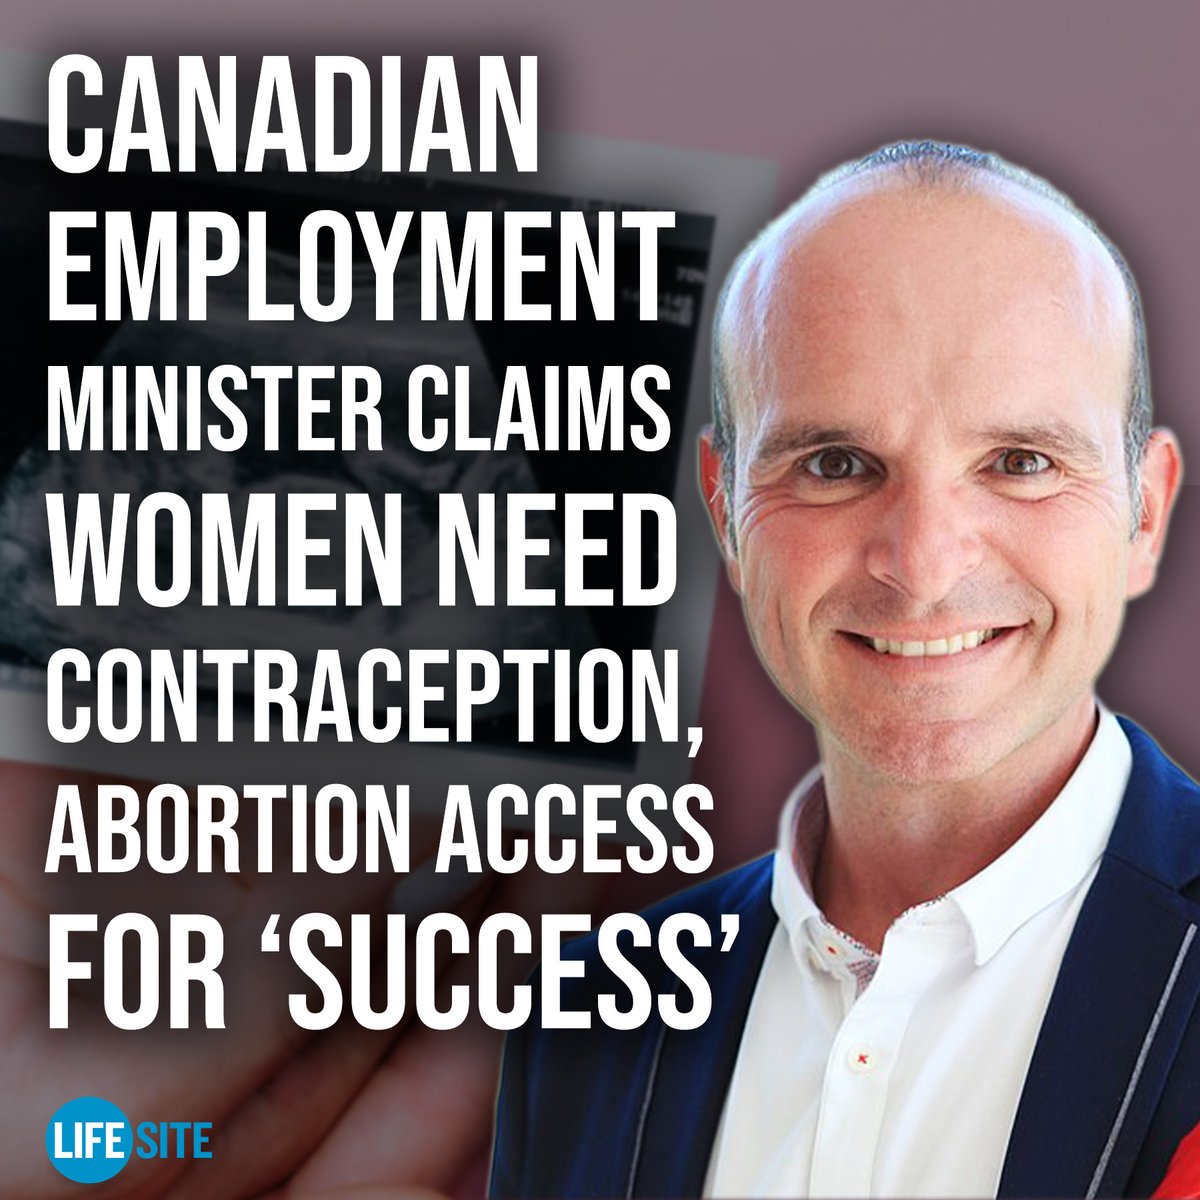 Liberal Minister of Employment Randy Boissonnault claimed the @JustinTrudeau government supports free contraceptives and abortion because they believe in 'equipping women for success.' MORE: lifesitenews.com/news/canadian-… #JustinTrudeau #Canada #CanadaNews #abortion #ProLife